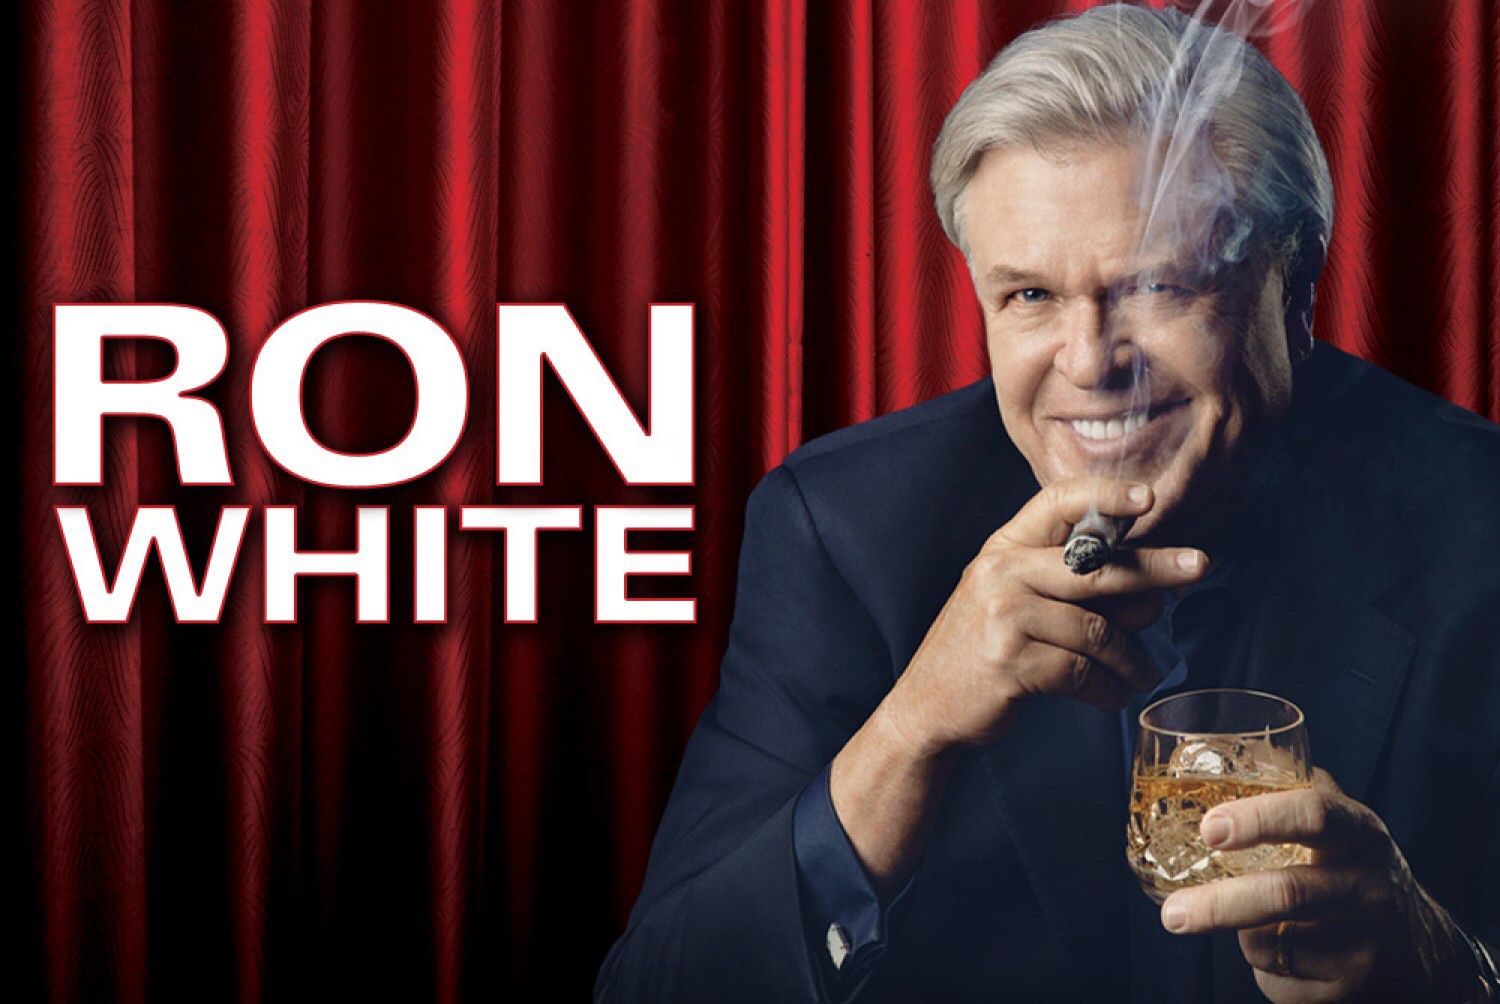 Ron white stand up show tickets